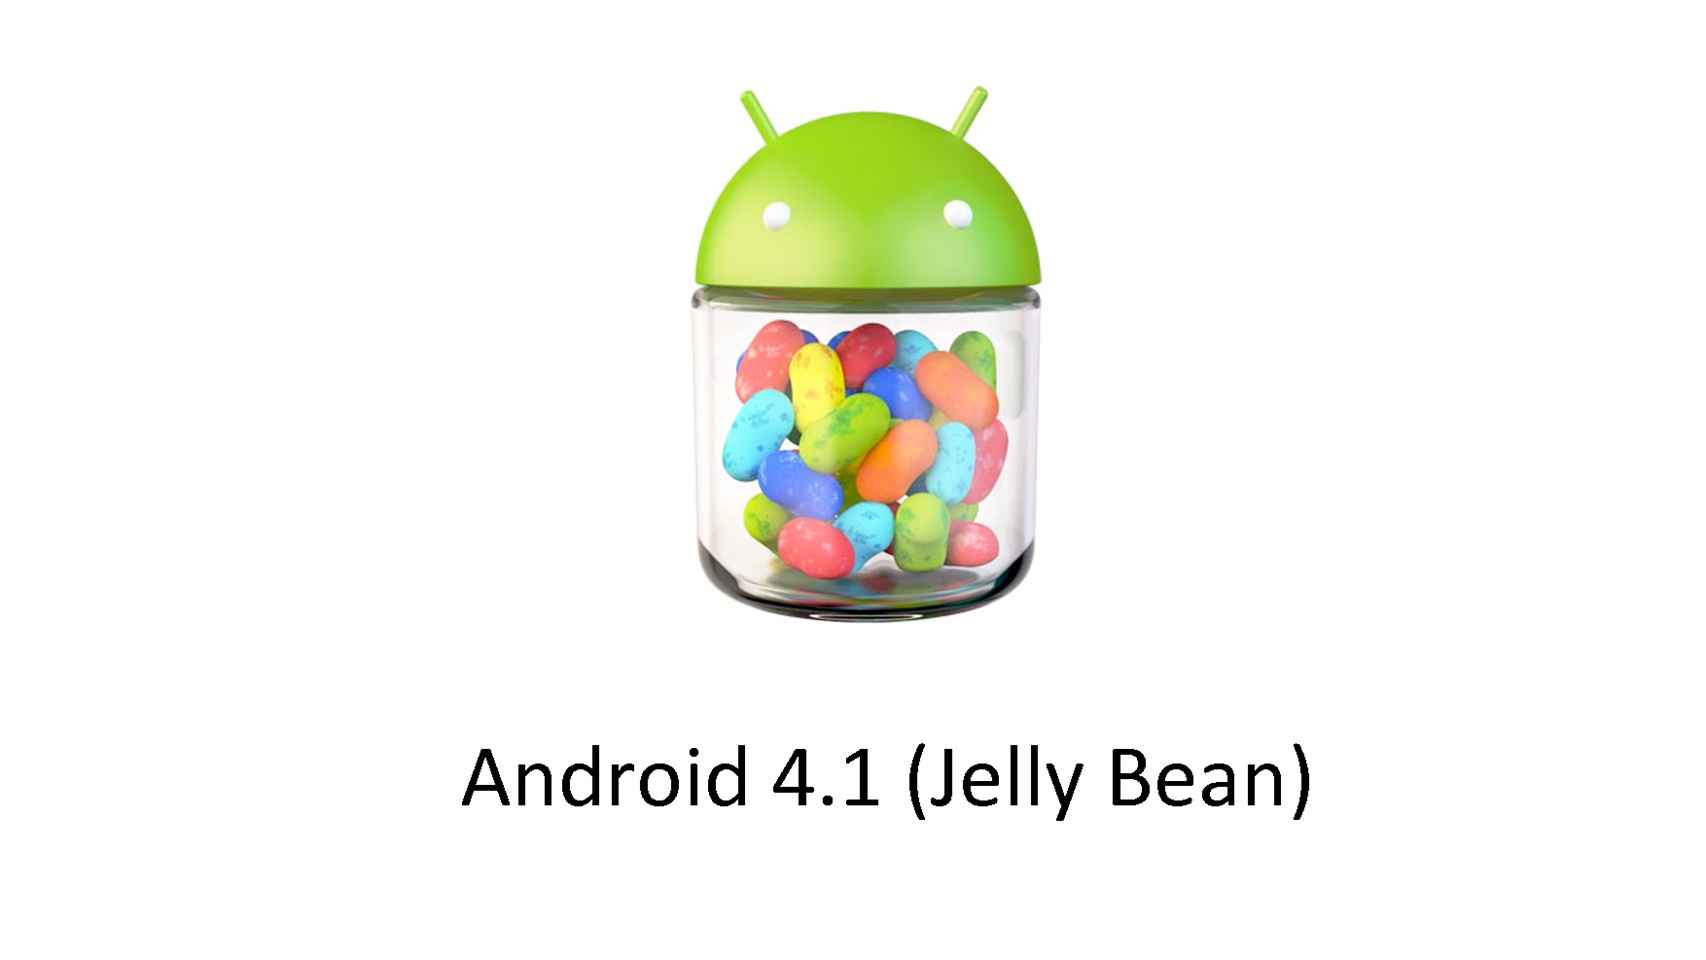 Android 4.1 Jelly Bean.